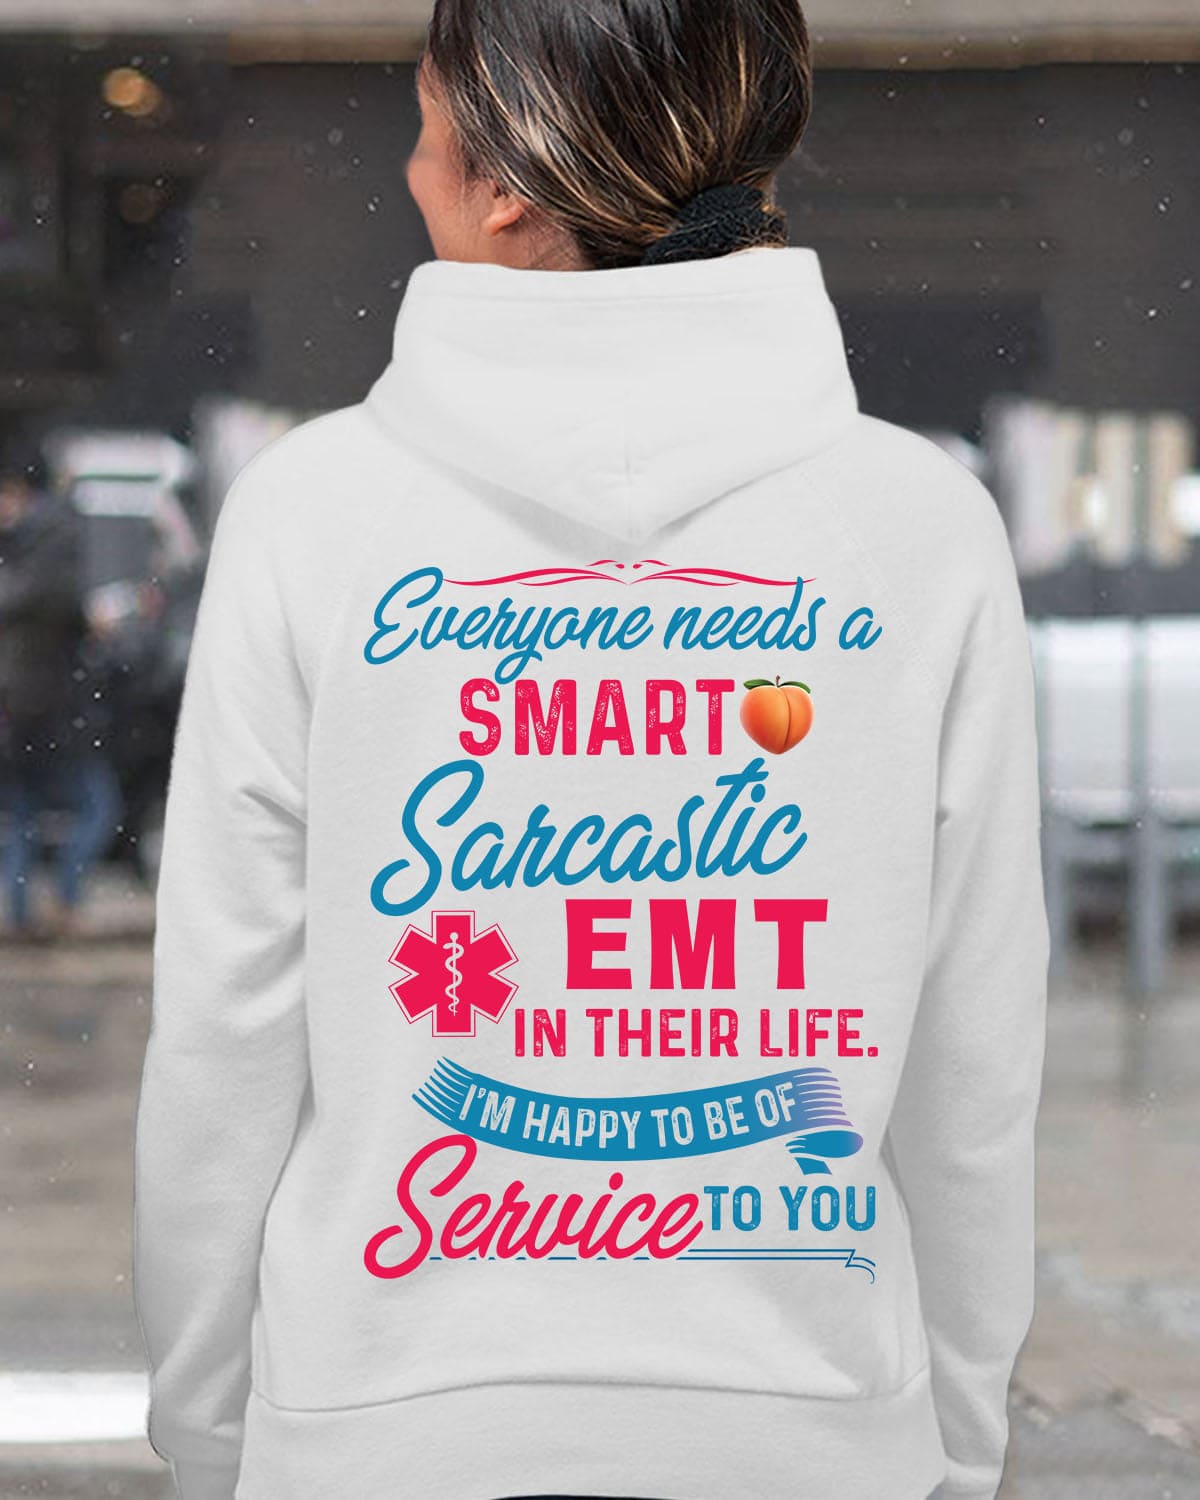 Everyone needs a smart sarcastic EMT in their life - Emergency medical technician